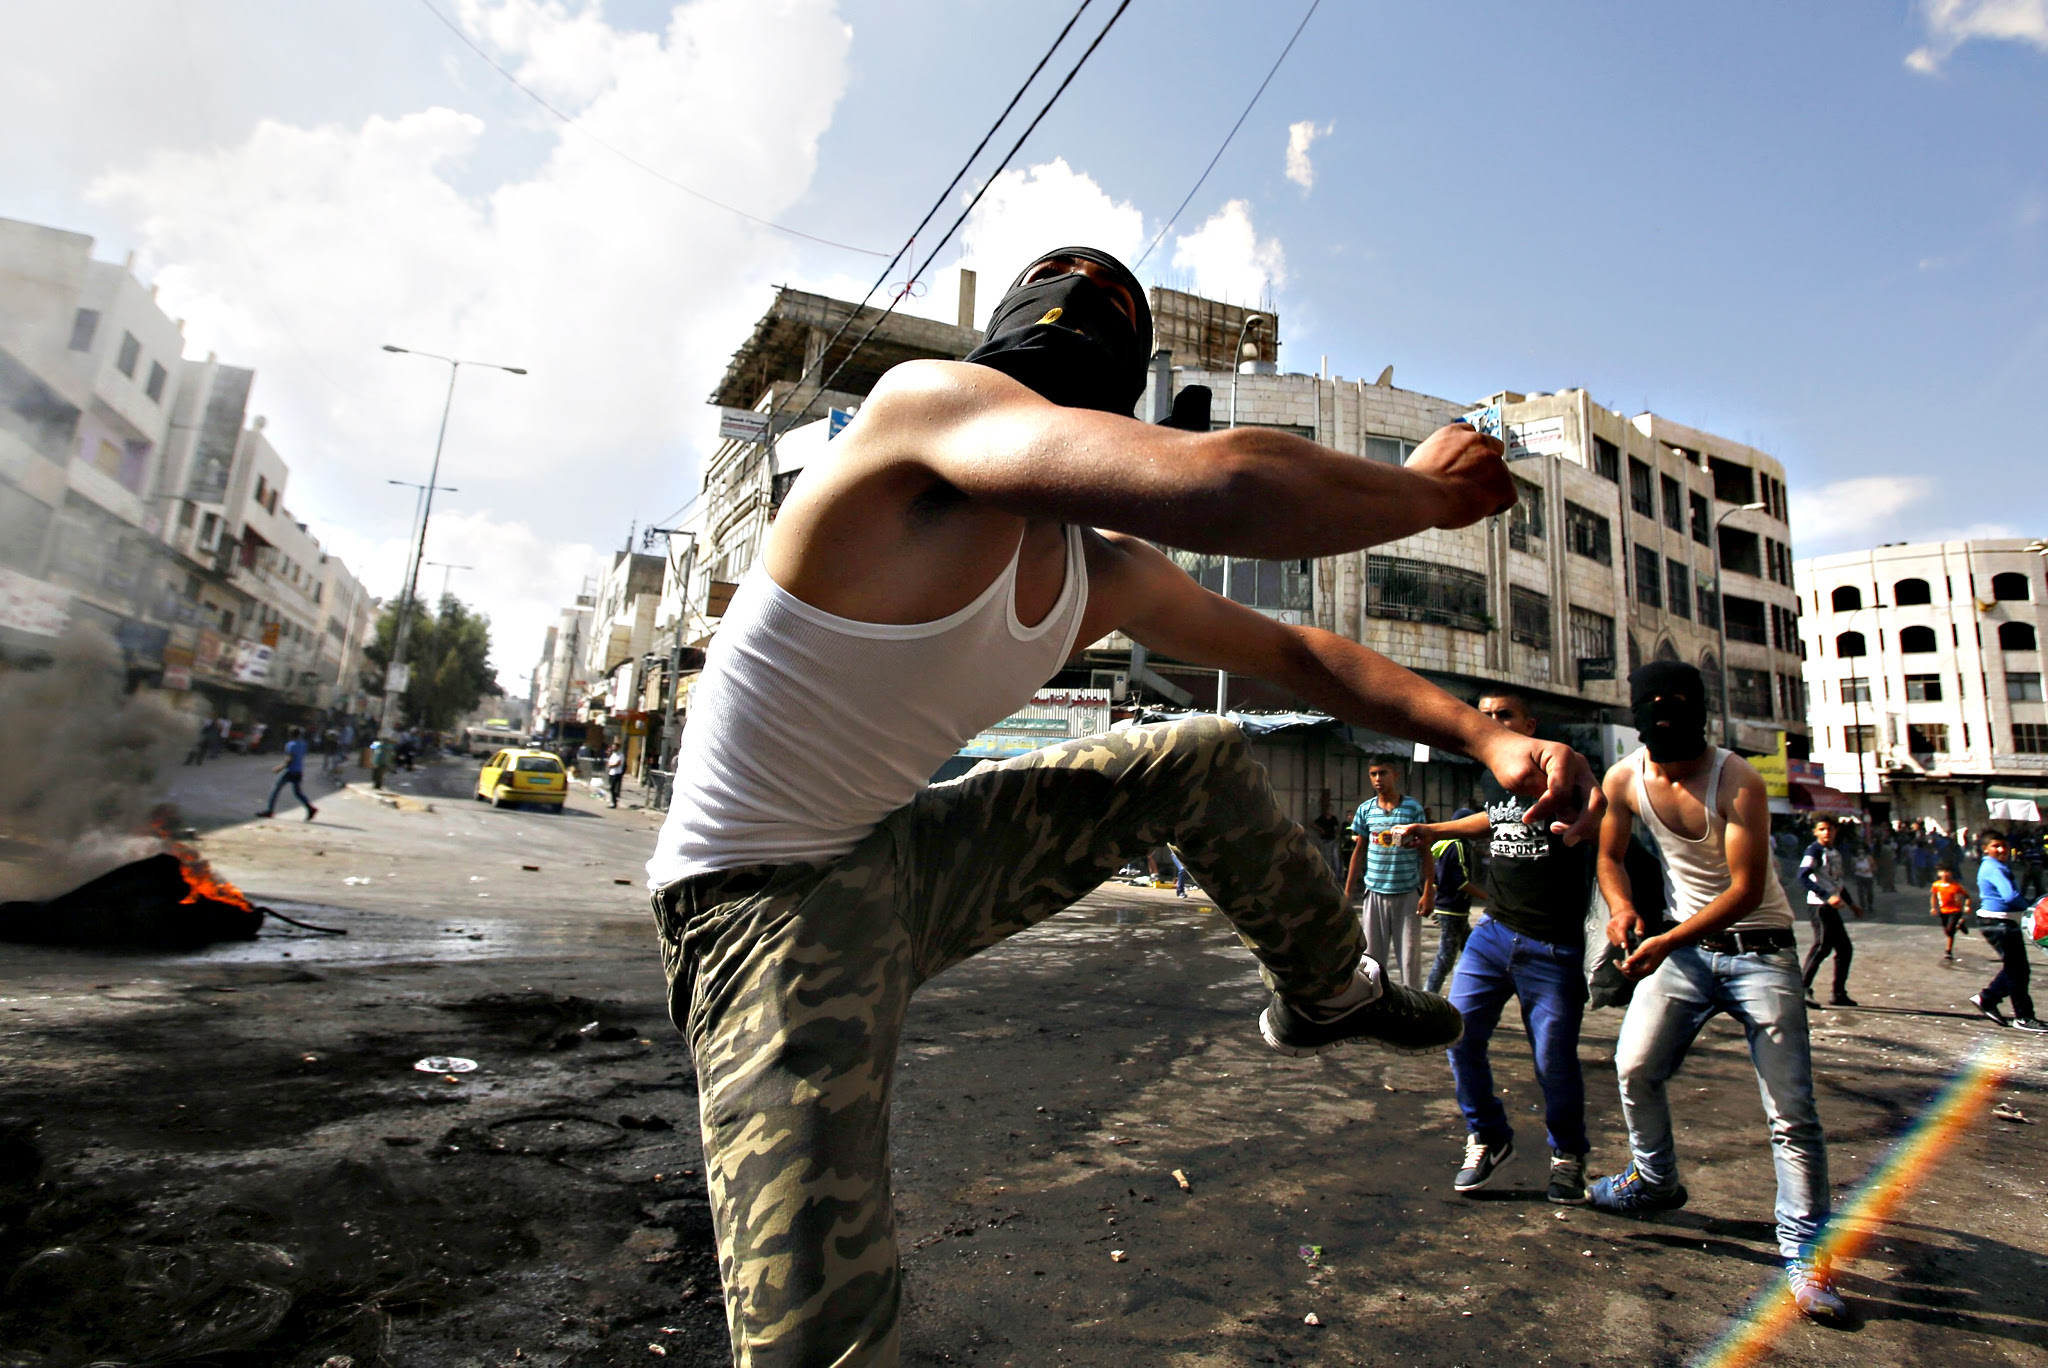 Palestinian protesters throw stones at Israeli troops during clashes over tension in Jerusalem's al-Aqsa mosque, in the occupied West Bank city of Hebron...Palestinian protesters throw stones at Israeli troops during clashes over tension in Jerusalem's al-Aqsa mosque, in the occupied West Bank city of Hebron September 29, 2015. Israeli police and Palestinians clashed on Sunday at Jerusalem's al-Aqsa mosque compound, where violence in recent weeks has raised international concern. 